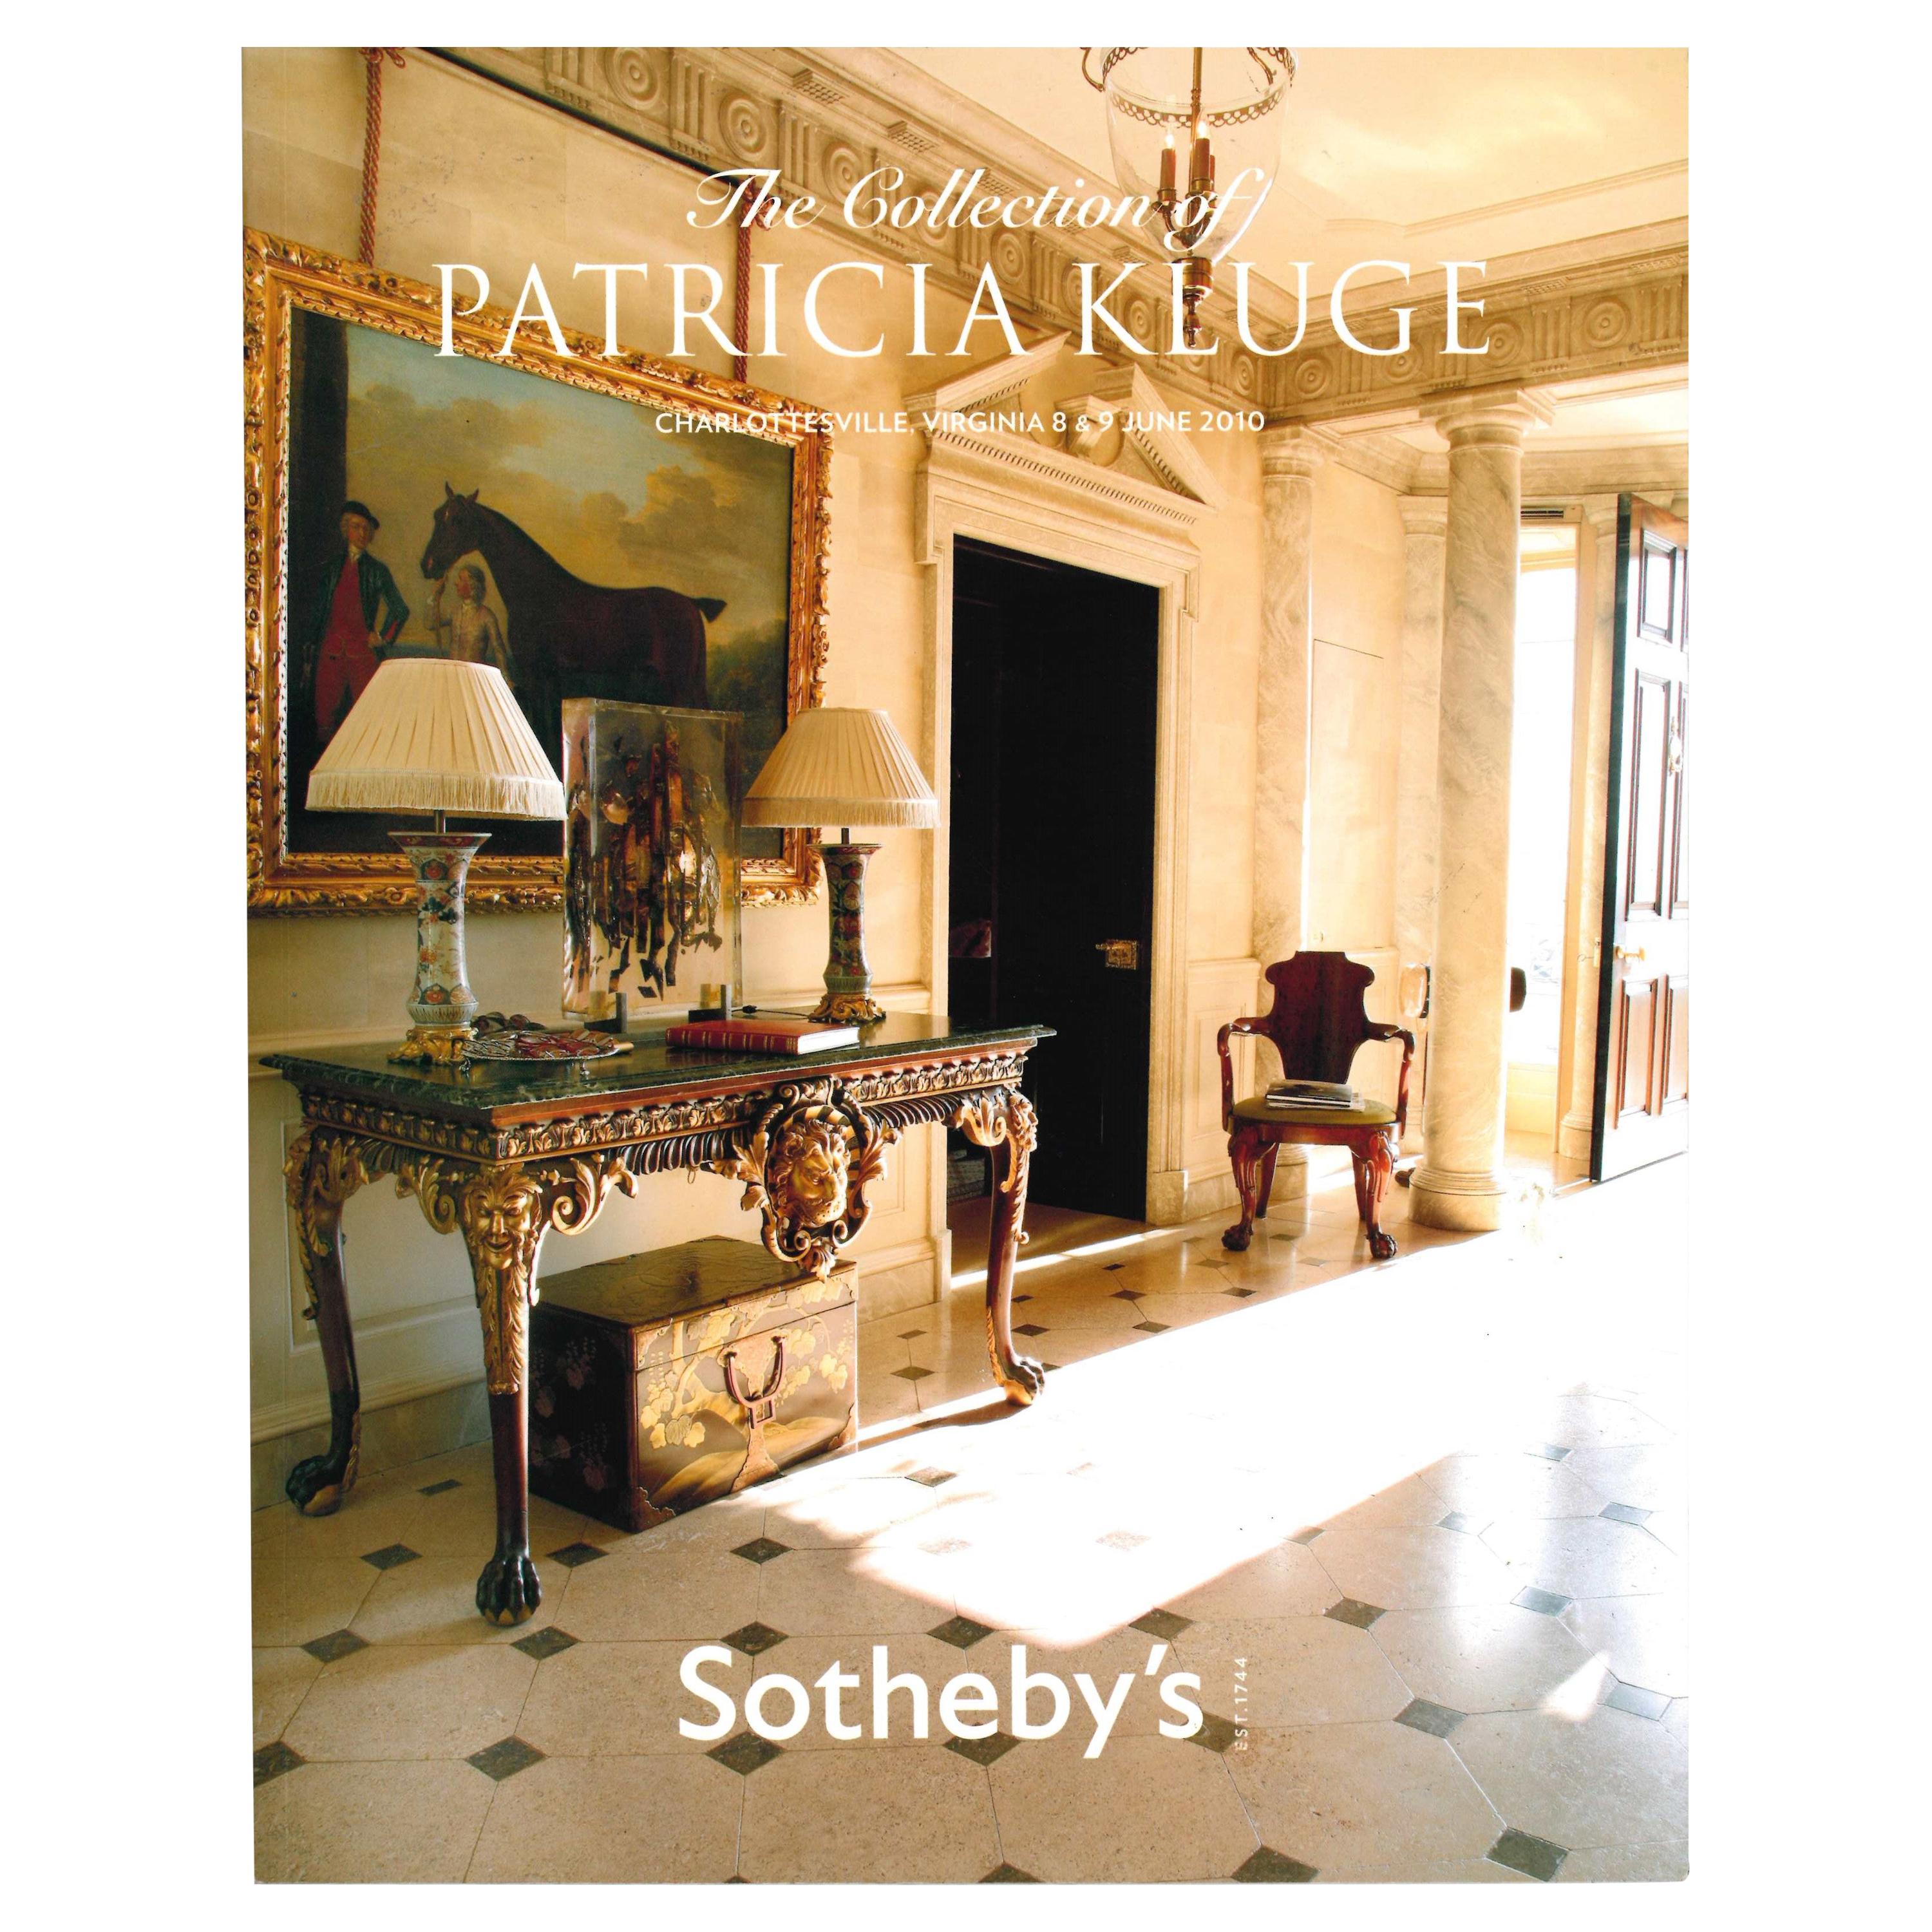 The Collection Of Patricia Kluge Charlottesville, Sotheby's Catalogue, 2010